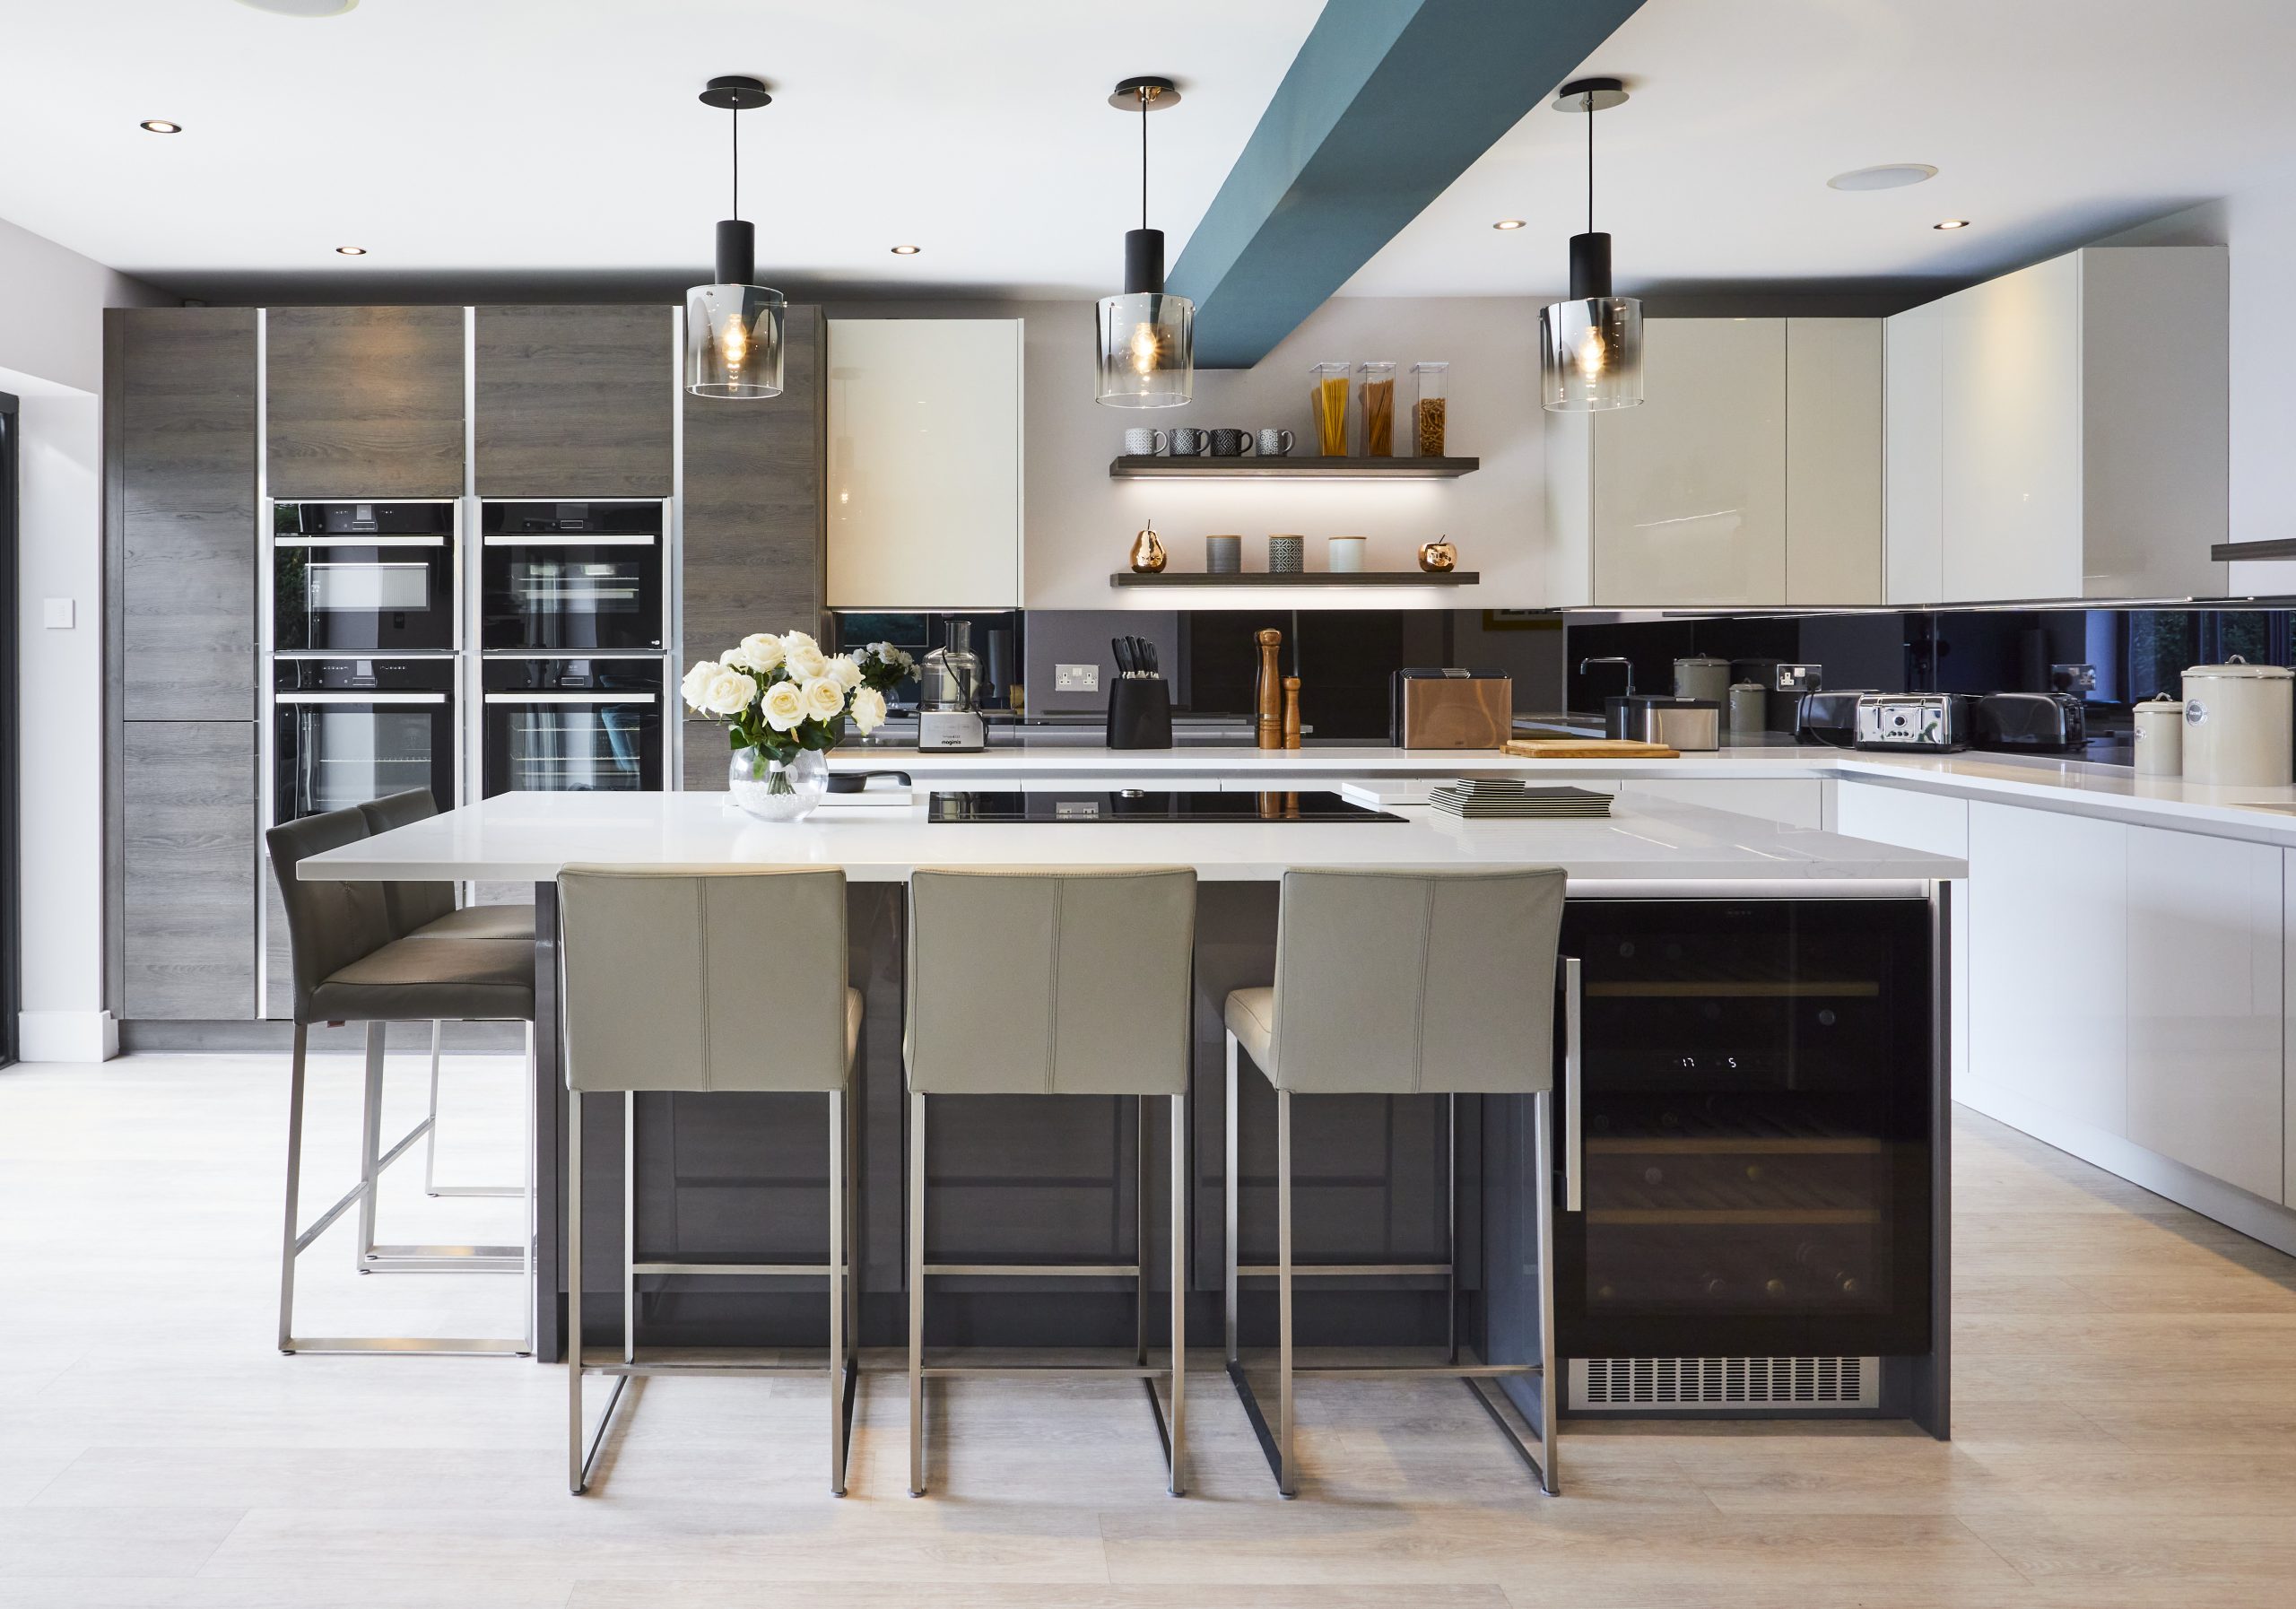 Ashford Kitchens & Interiors - Avoiding Kitchen Installation Mistakes; Common Issues and How to Prevent Them 2